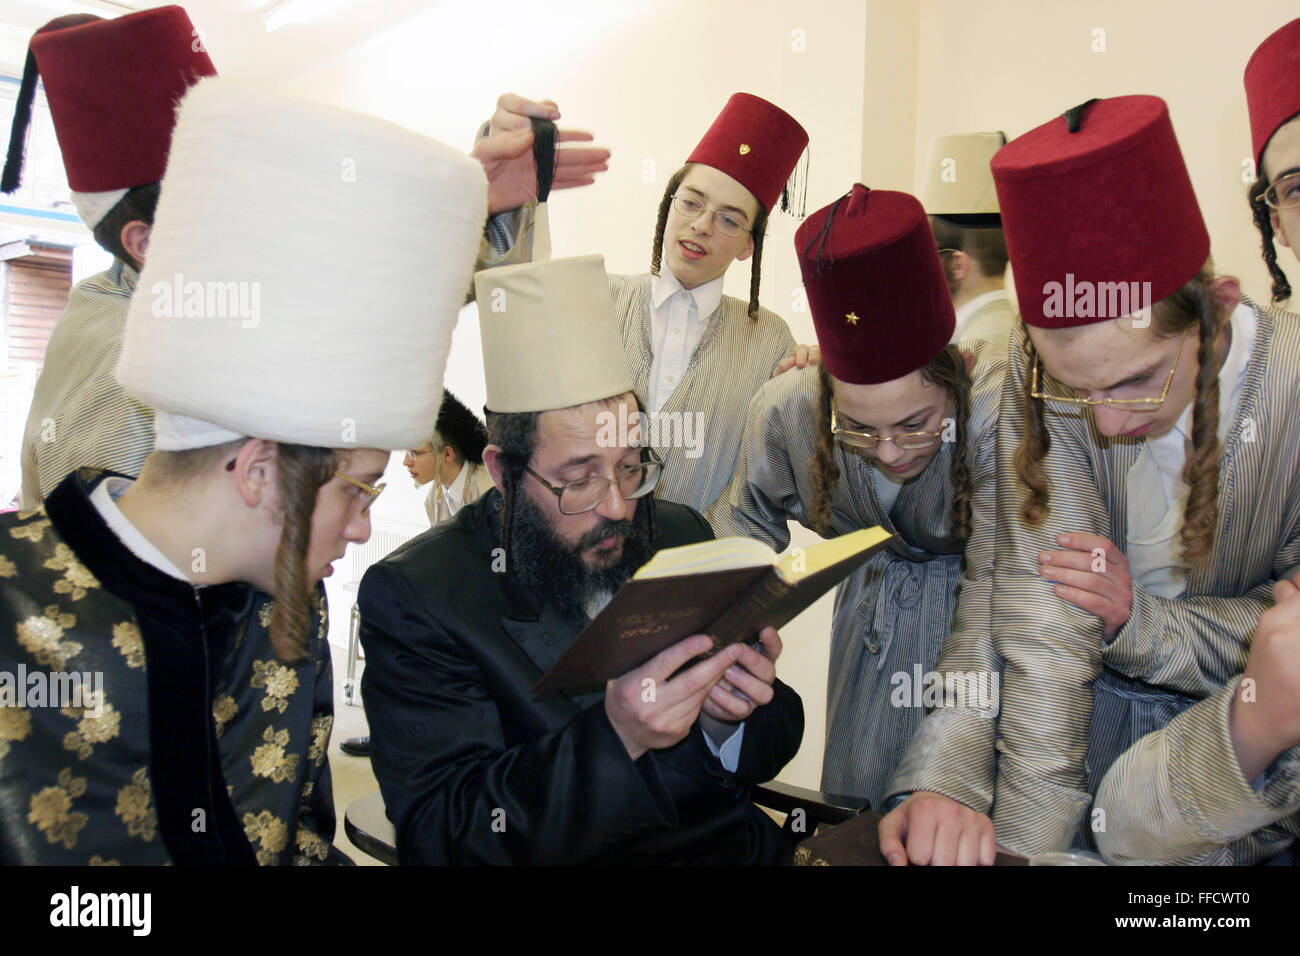 During the Jewish festival of Purim a group of Orthodox Jewish boys from the Viznitz Yeshiva (school) in fancy dress visit local businessmen to collect money for their school. Some of the businessman that they visit read a prayer to the group. The young boys drink alcohol at every house they visit during the day. Stock Photo